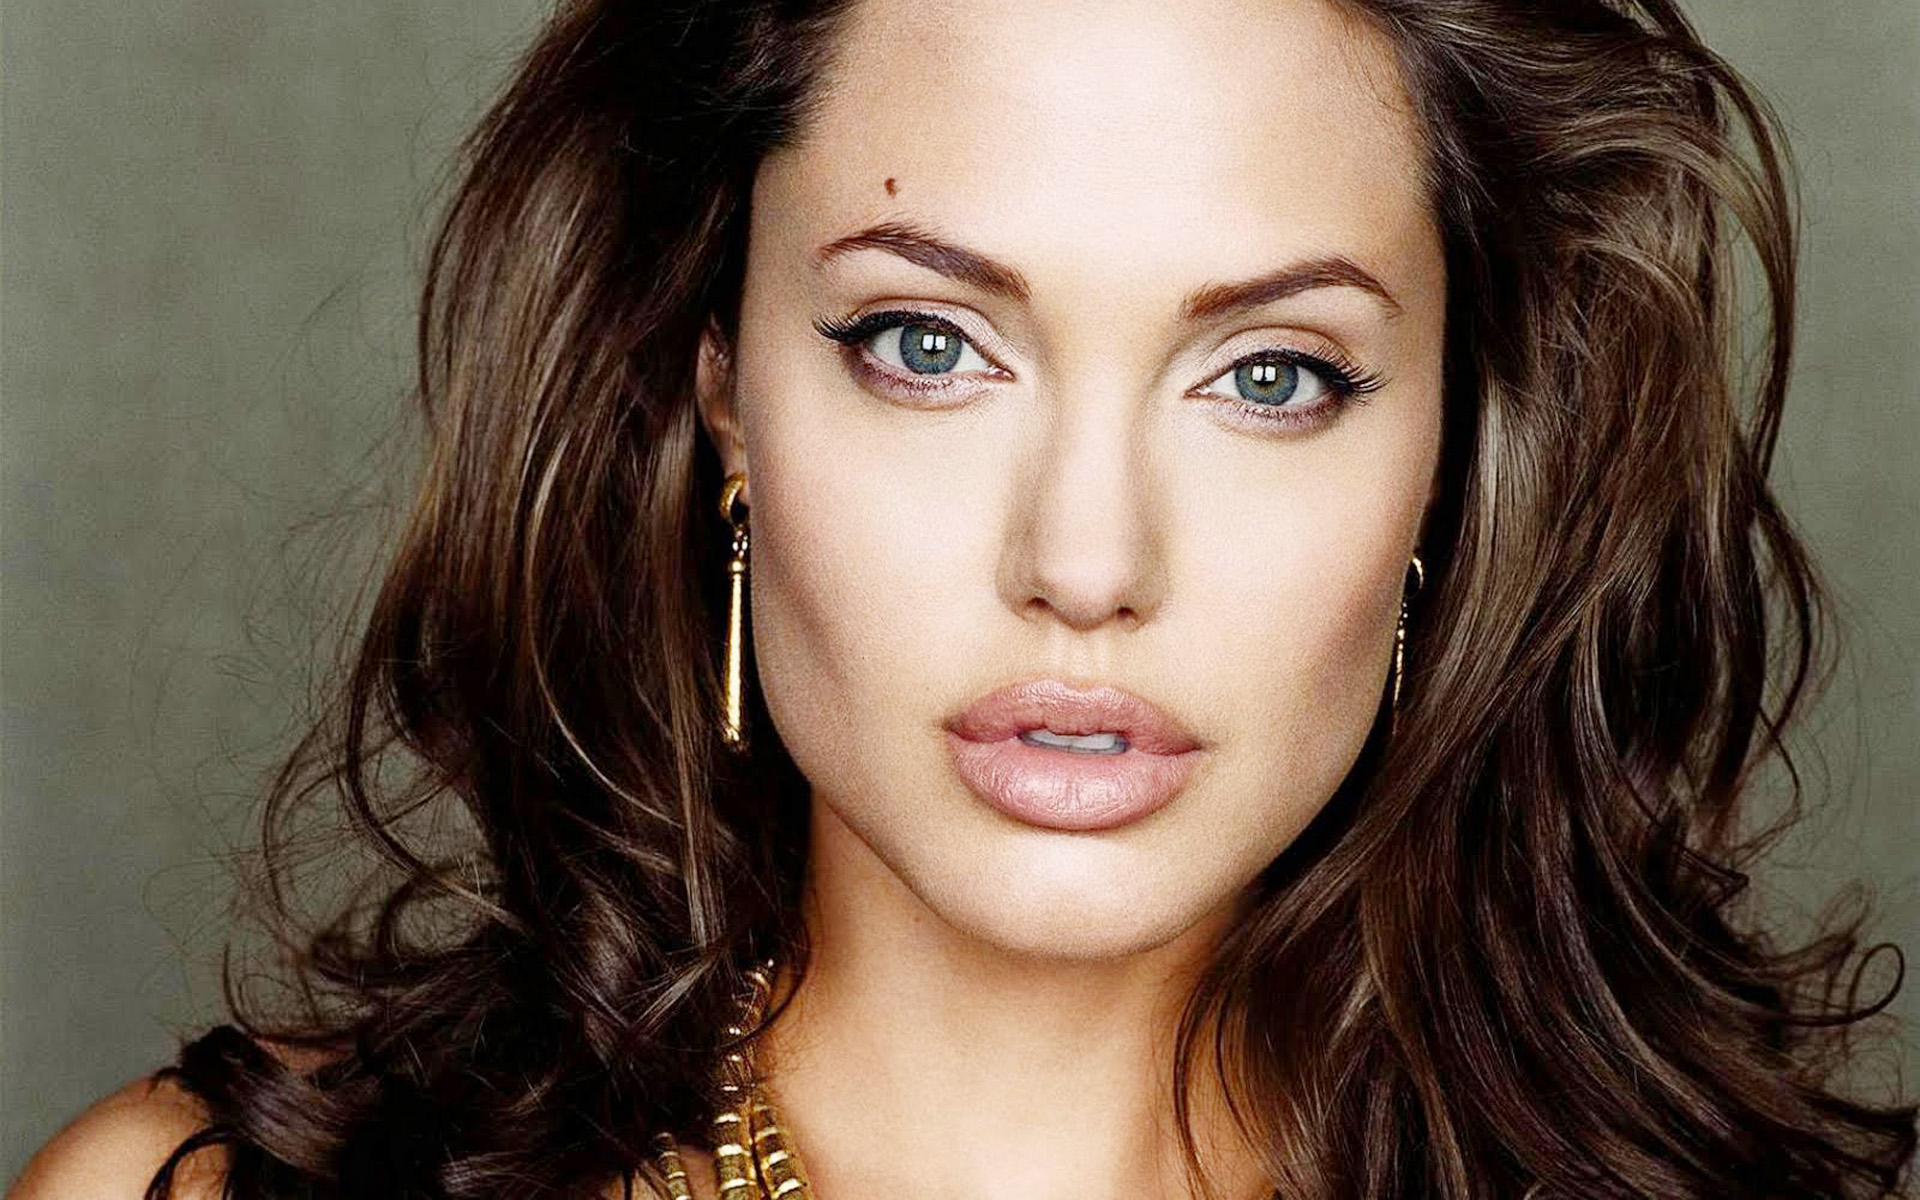 New Latest Wallpapers Of Angelina Jolie 2012 High Quality HD Wallpapers Download Free Images Wallpaper [wallpaper981.blogspot.com]